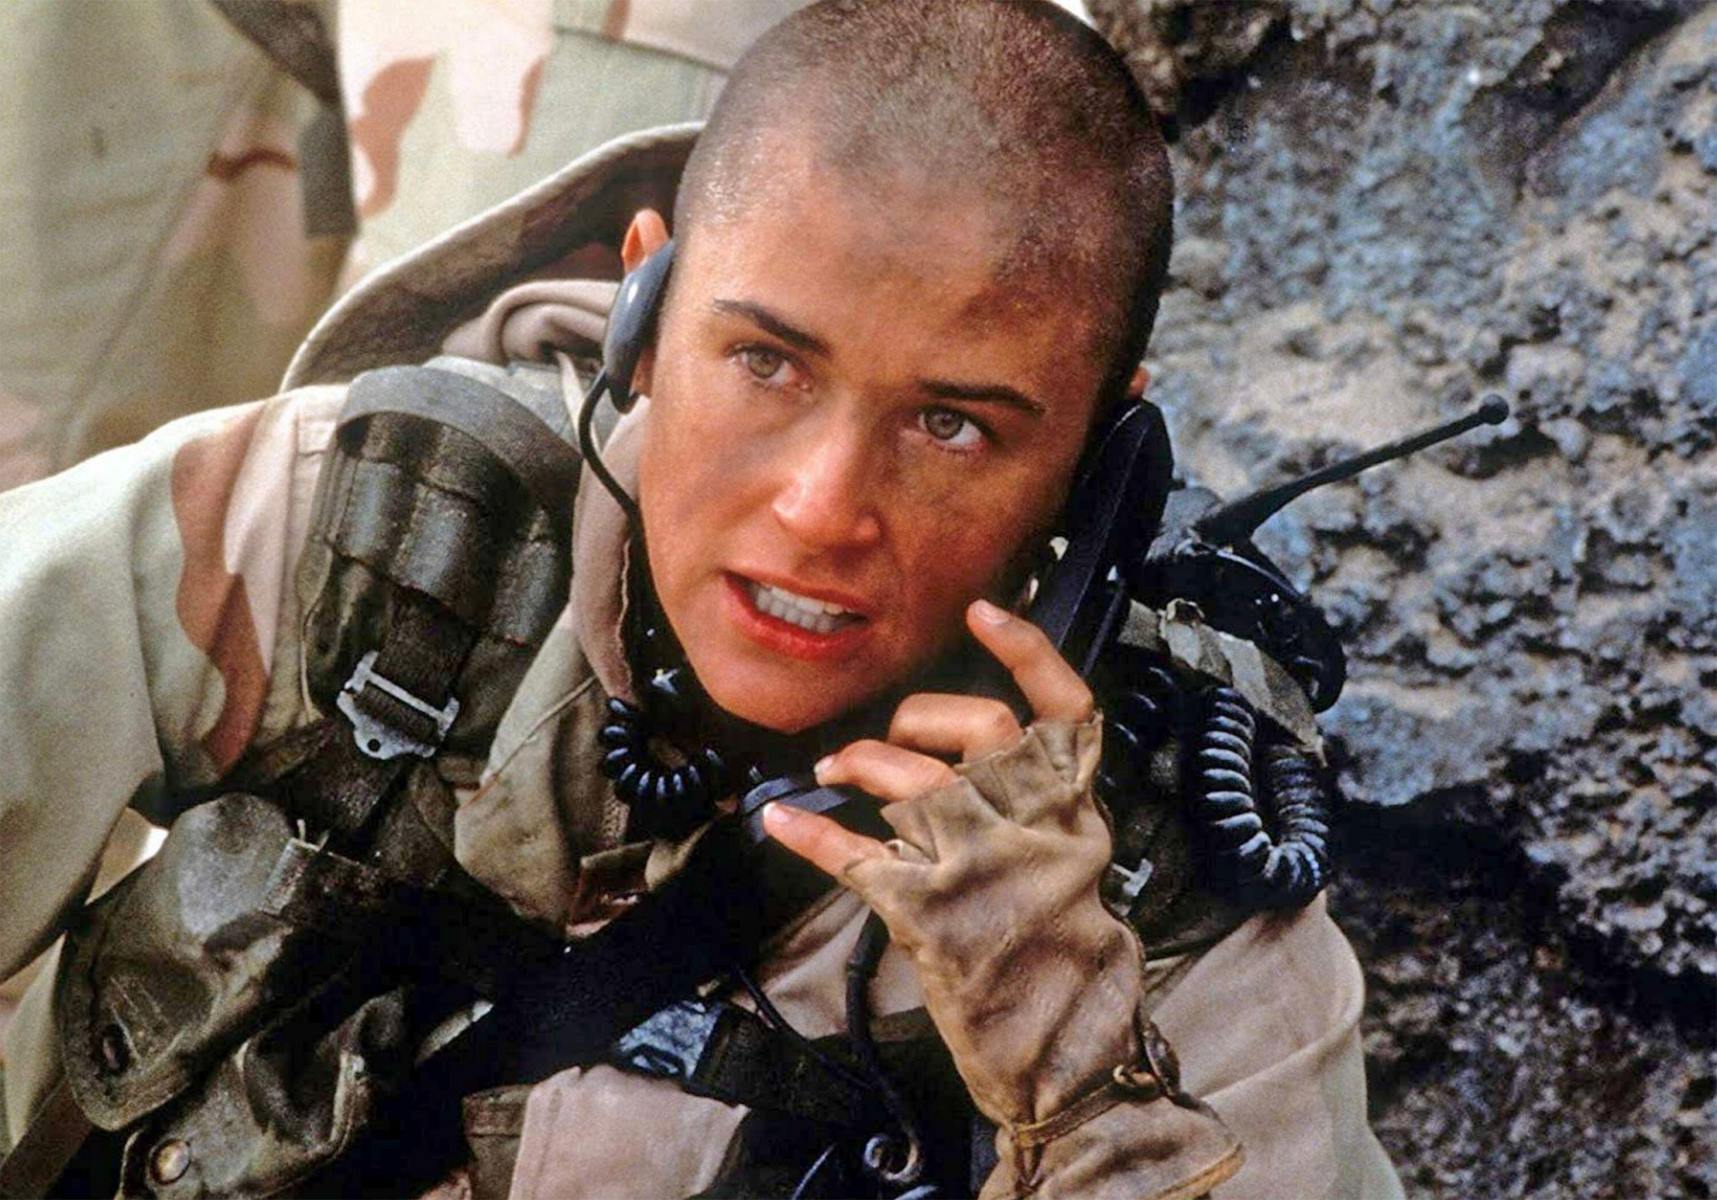 37-facts-about-the-movie-g-i-jane